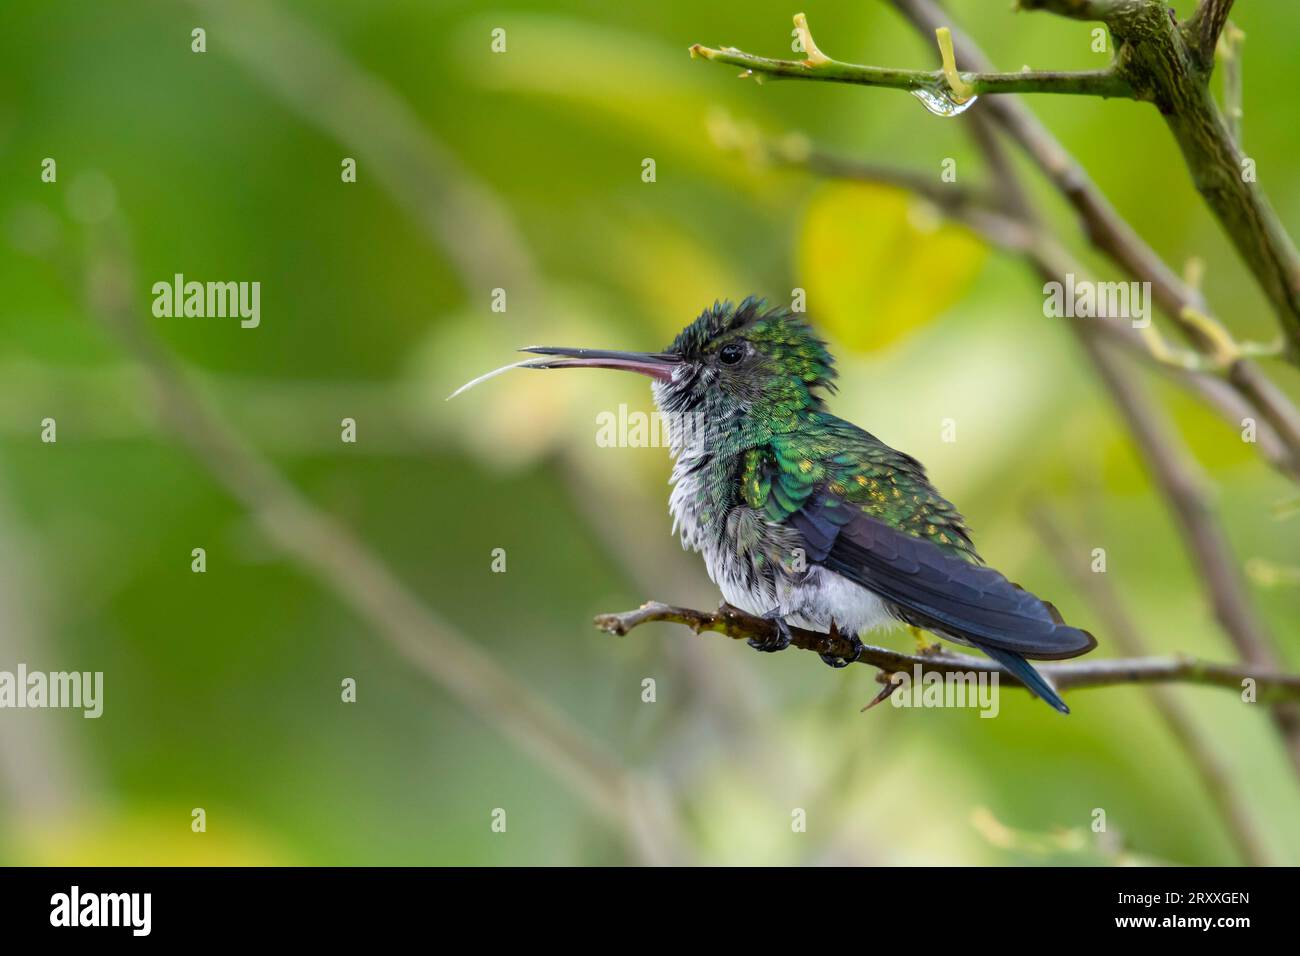 Blue-chinned Sapphire hummingbird, Chlorestes notata, perching in a citrus tree sticking her tongue out Stock Photo